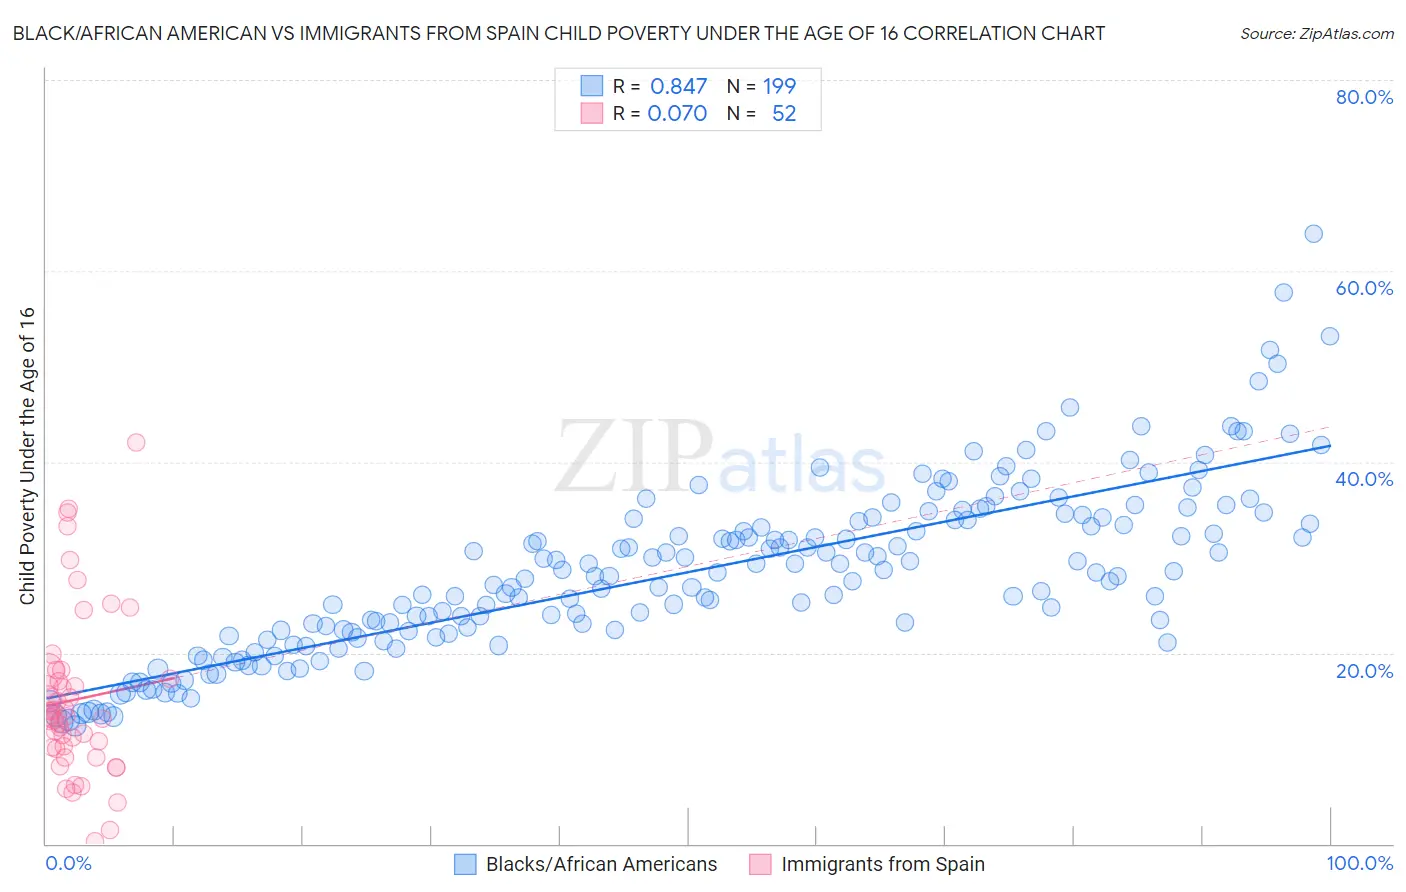 Black/African American vs Immigrants from Spain Child Poverty Under the Age of 16